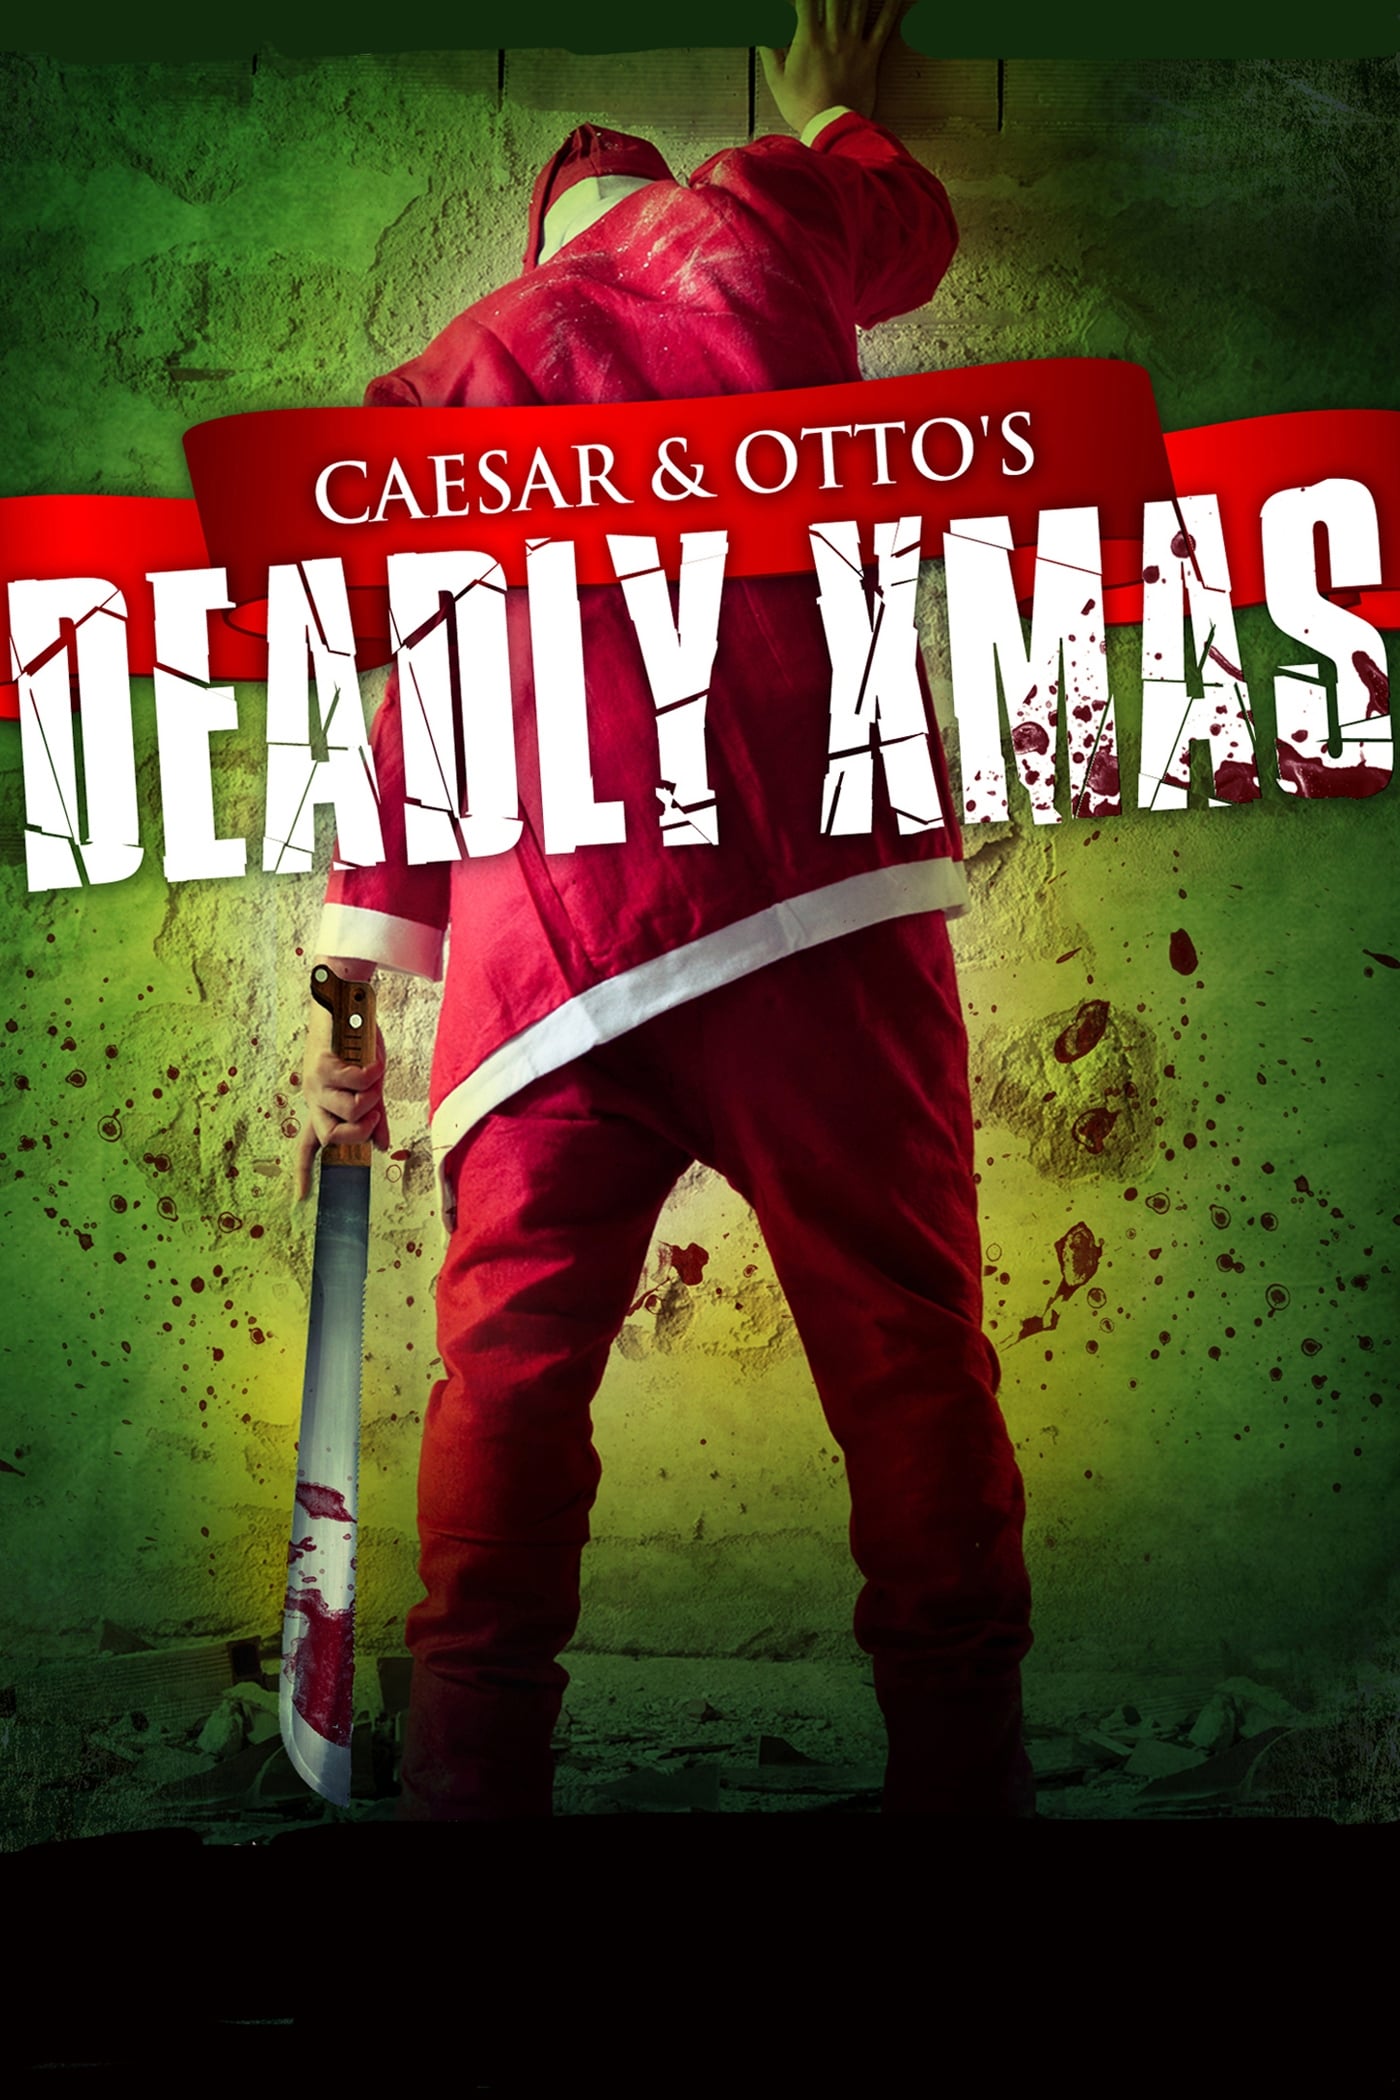 Caesar and Otto's Deadly Xmas (2012)